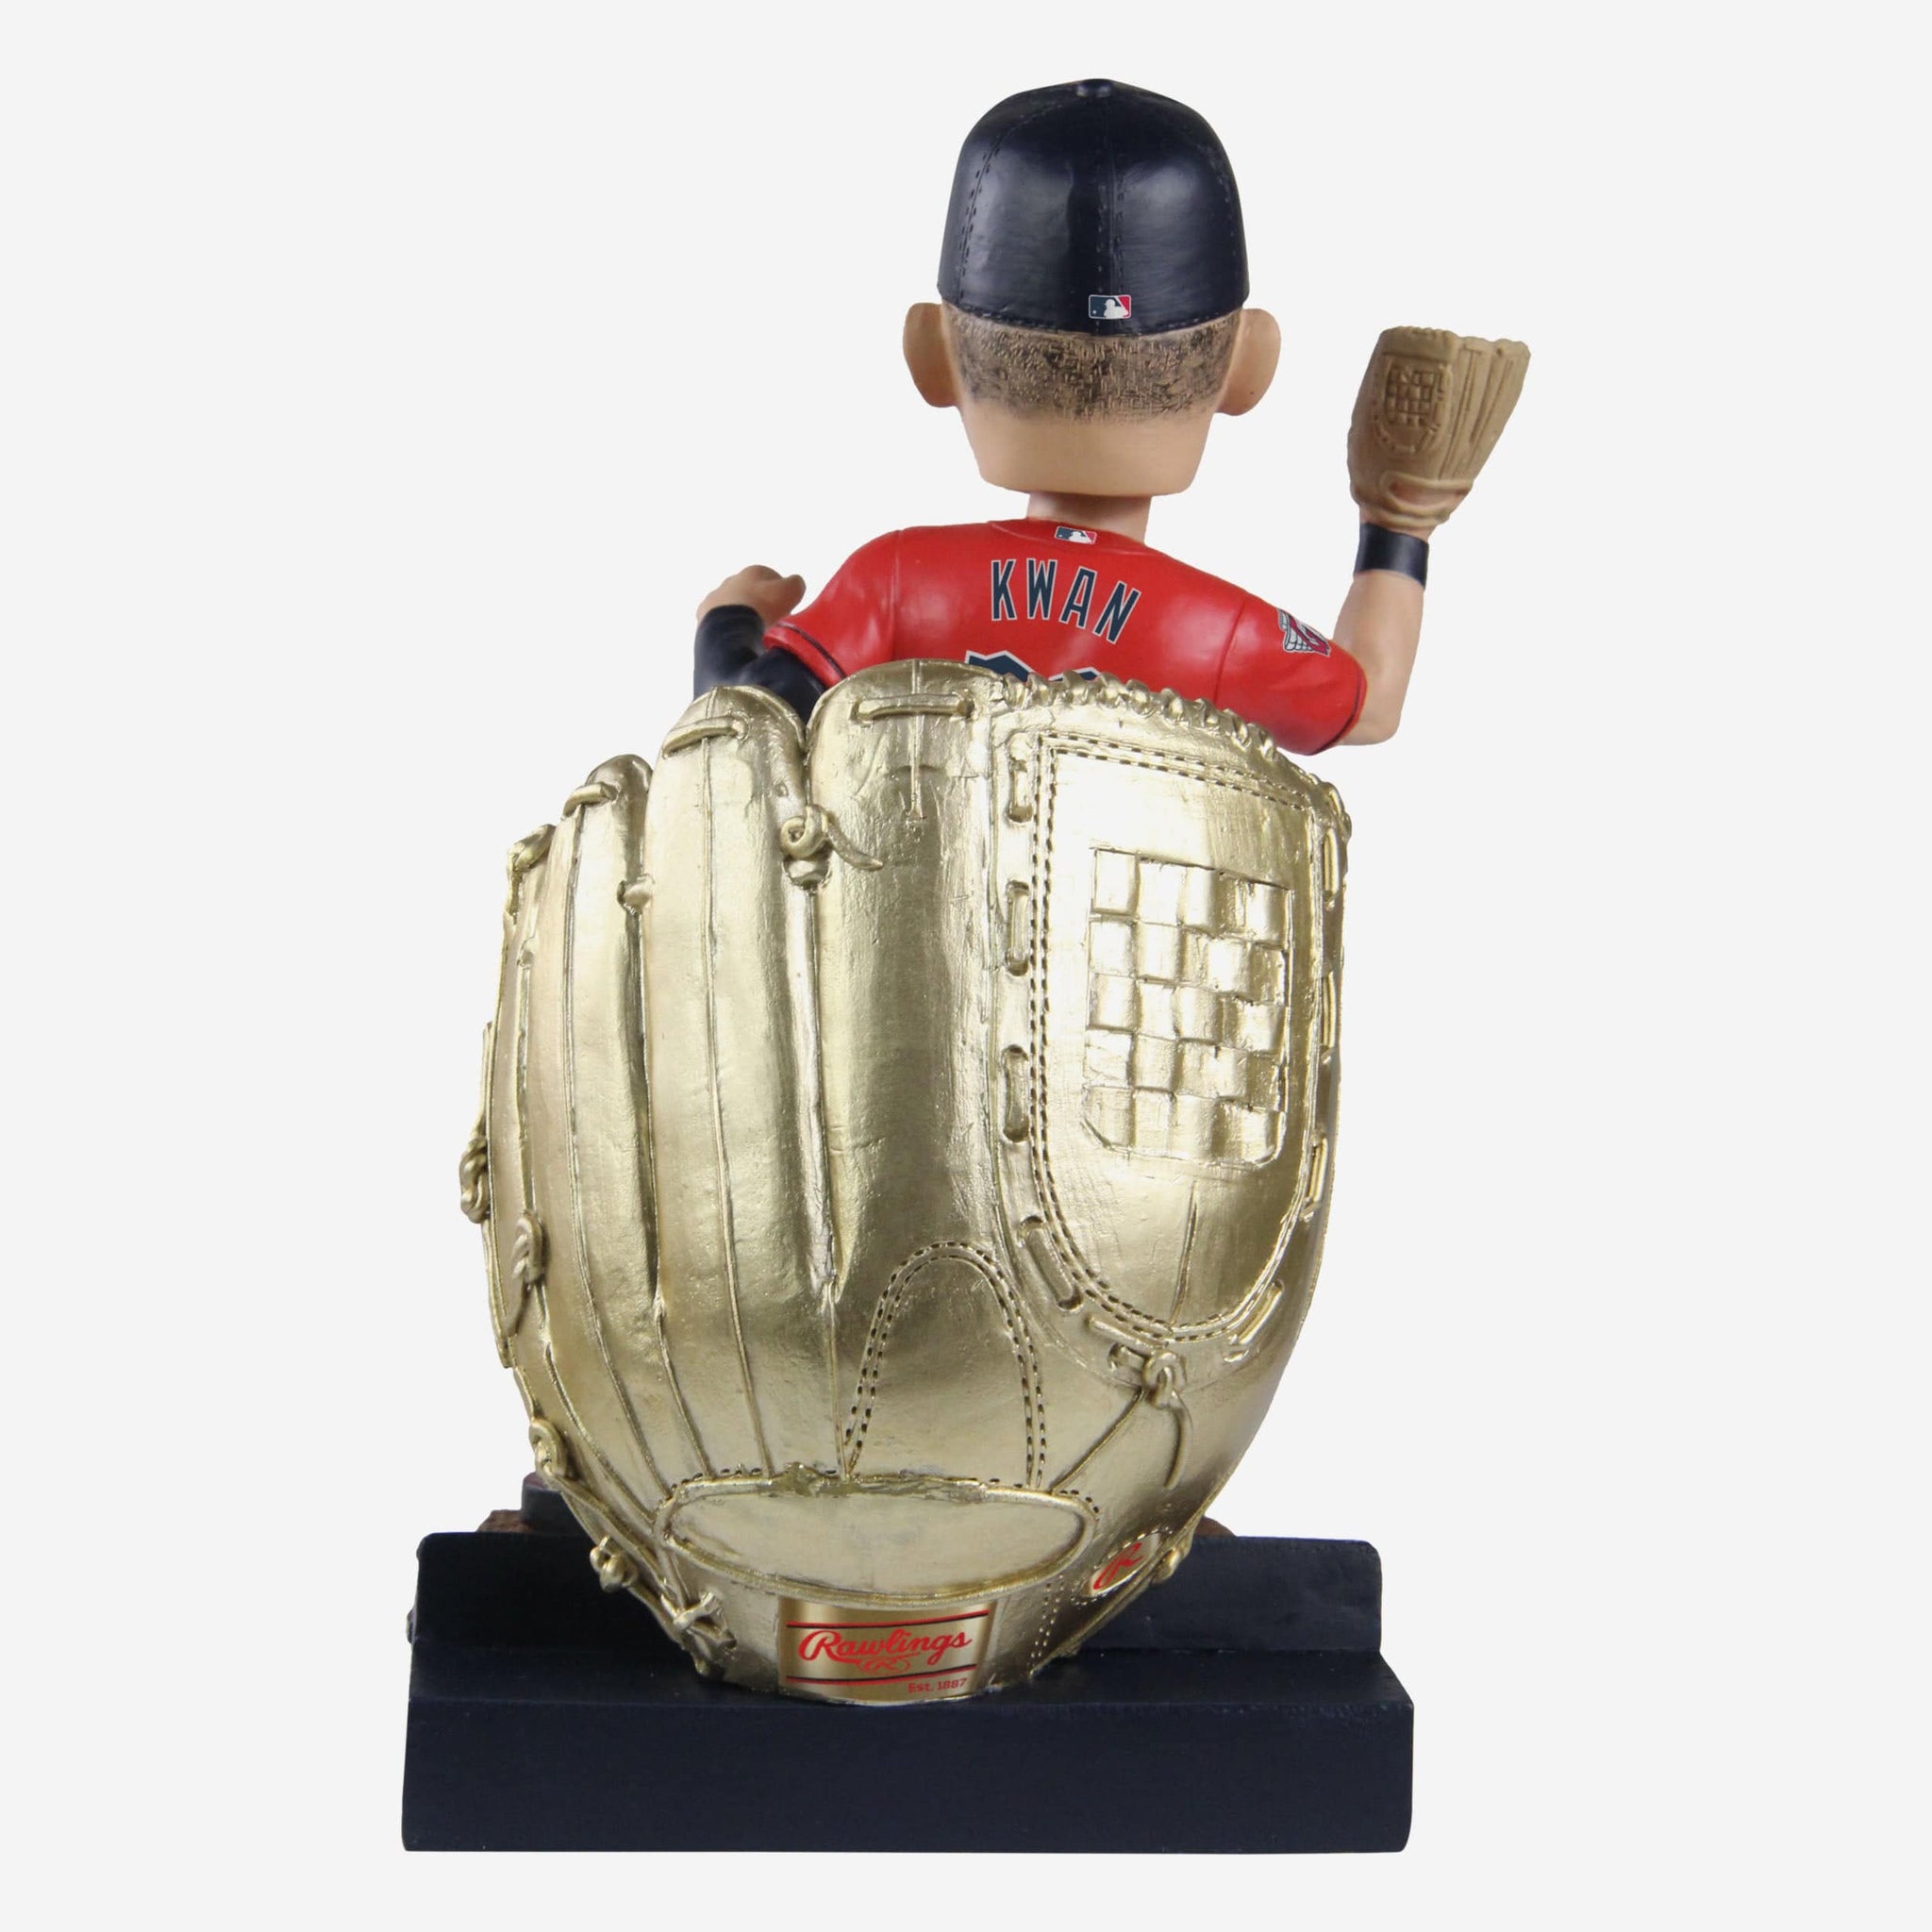 Steven Kwan Cleveland Guardians 2022 Gold Glove Bobblehead Officially Licensed by MLB